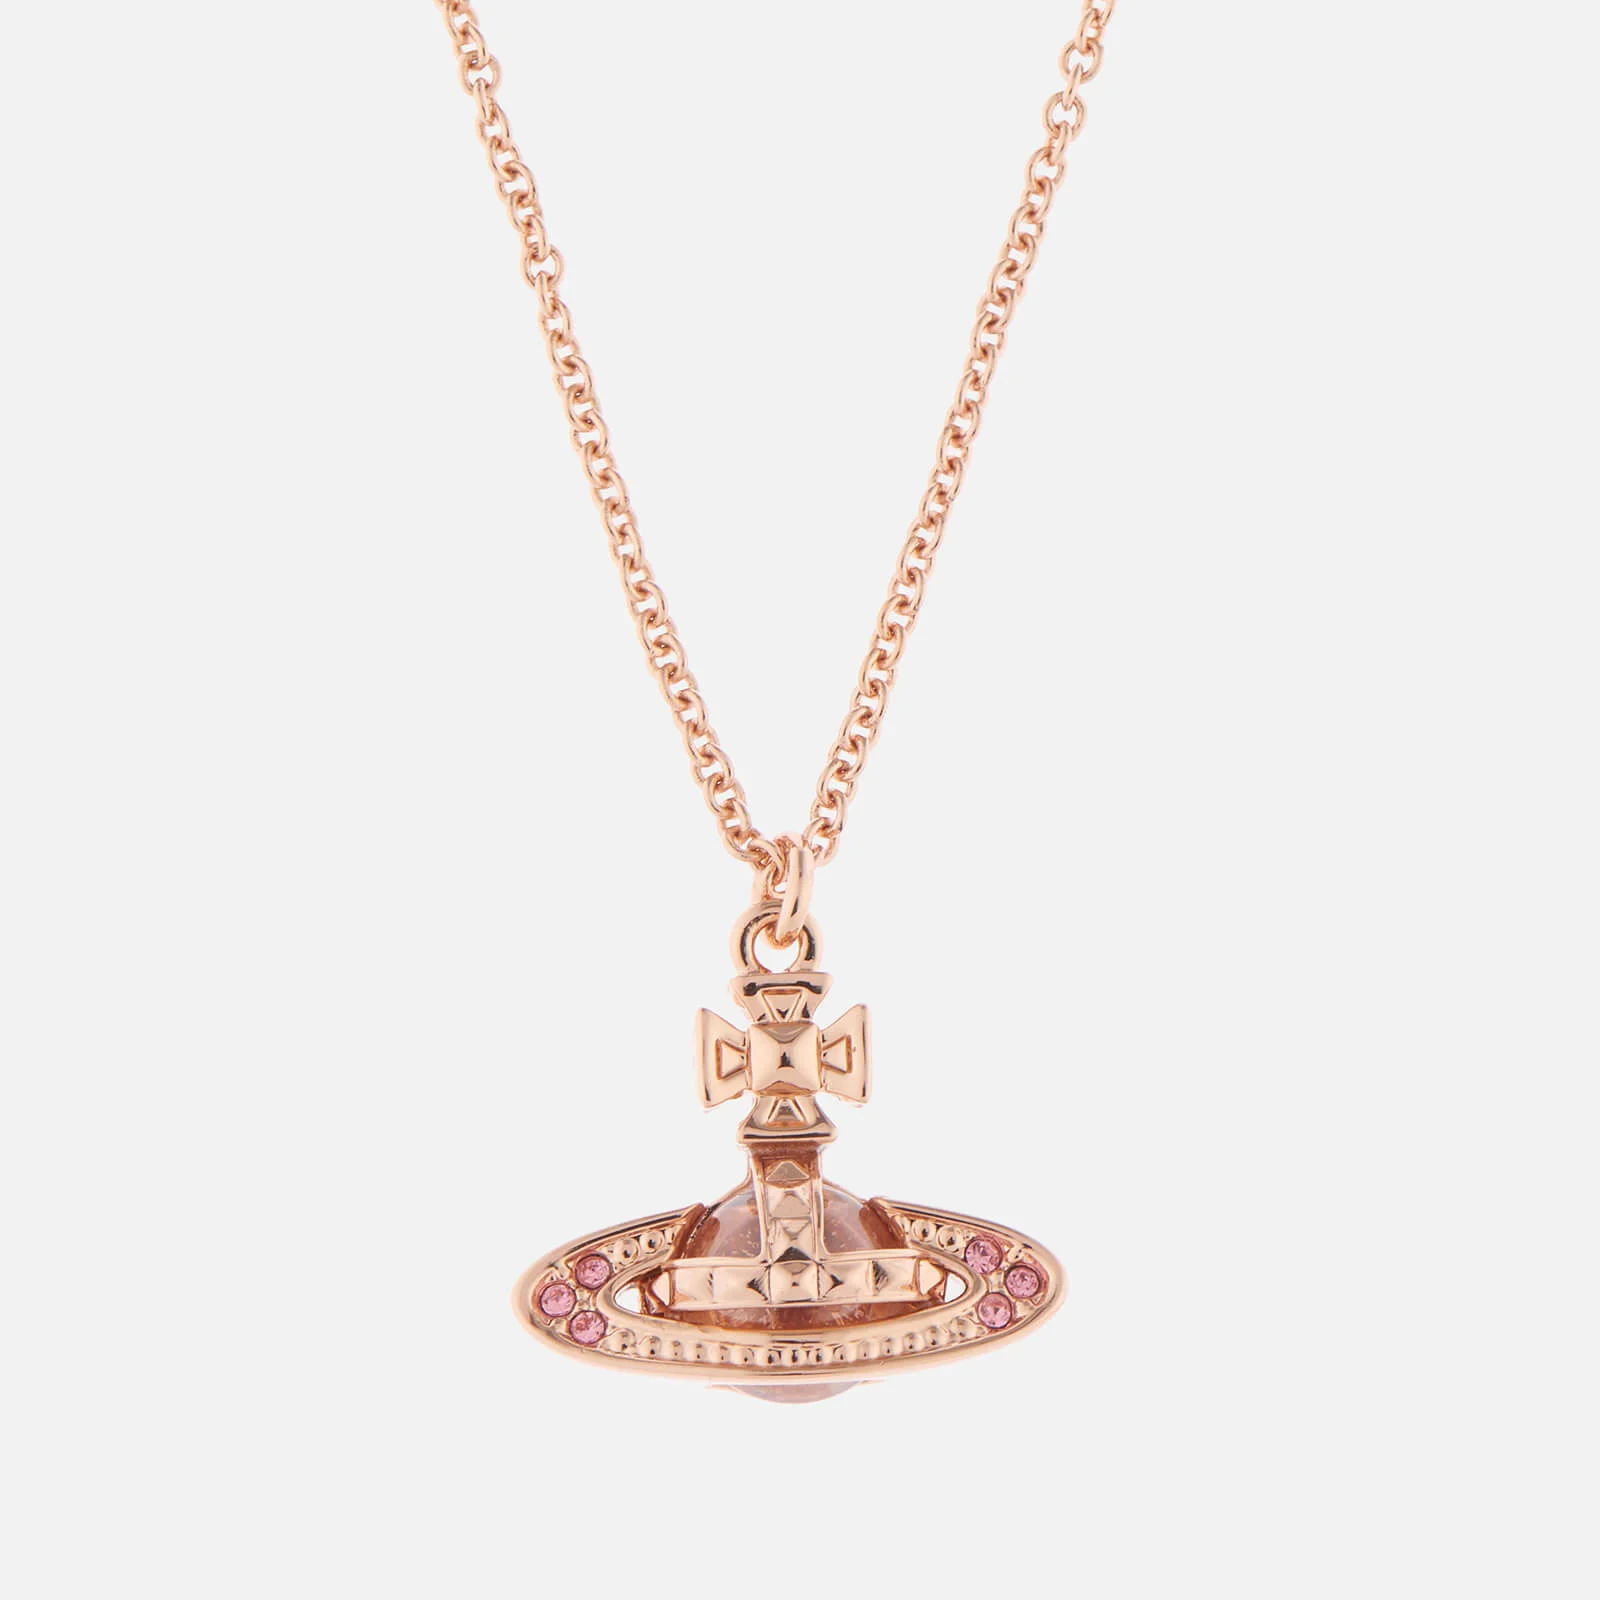 Vivienne Westwood Women's Pina Small Bas Relief Pendant - Pink Gold Light Rose Image 1